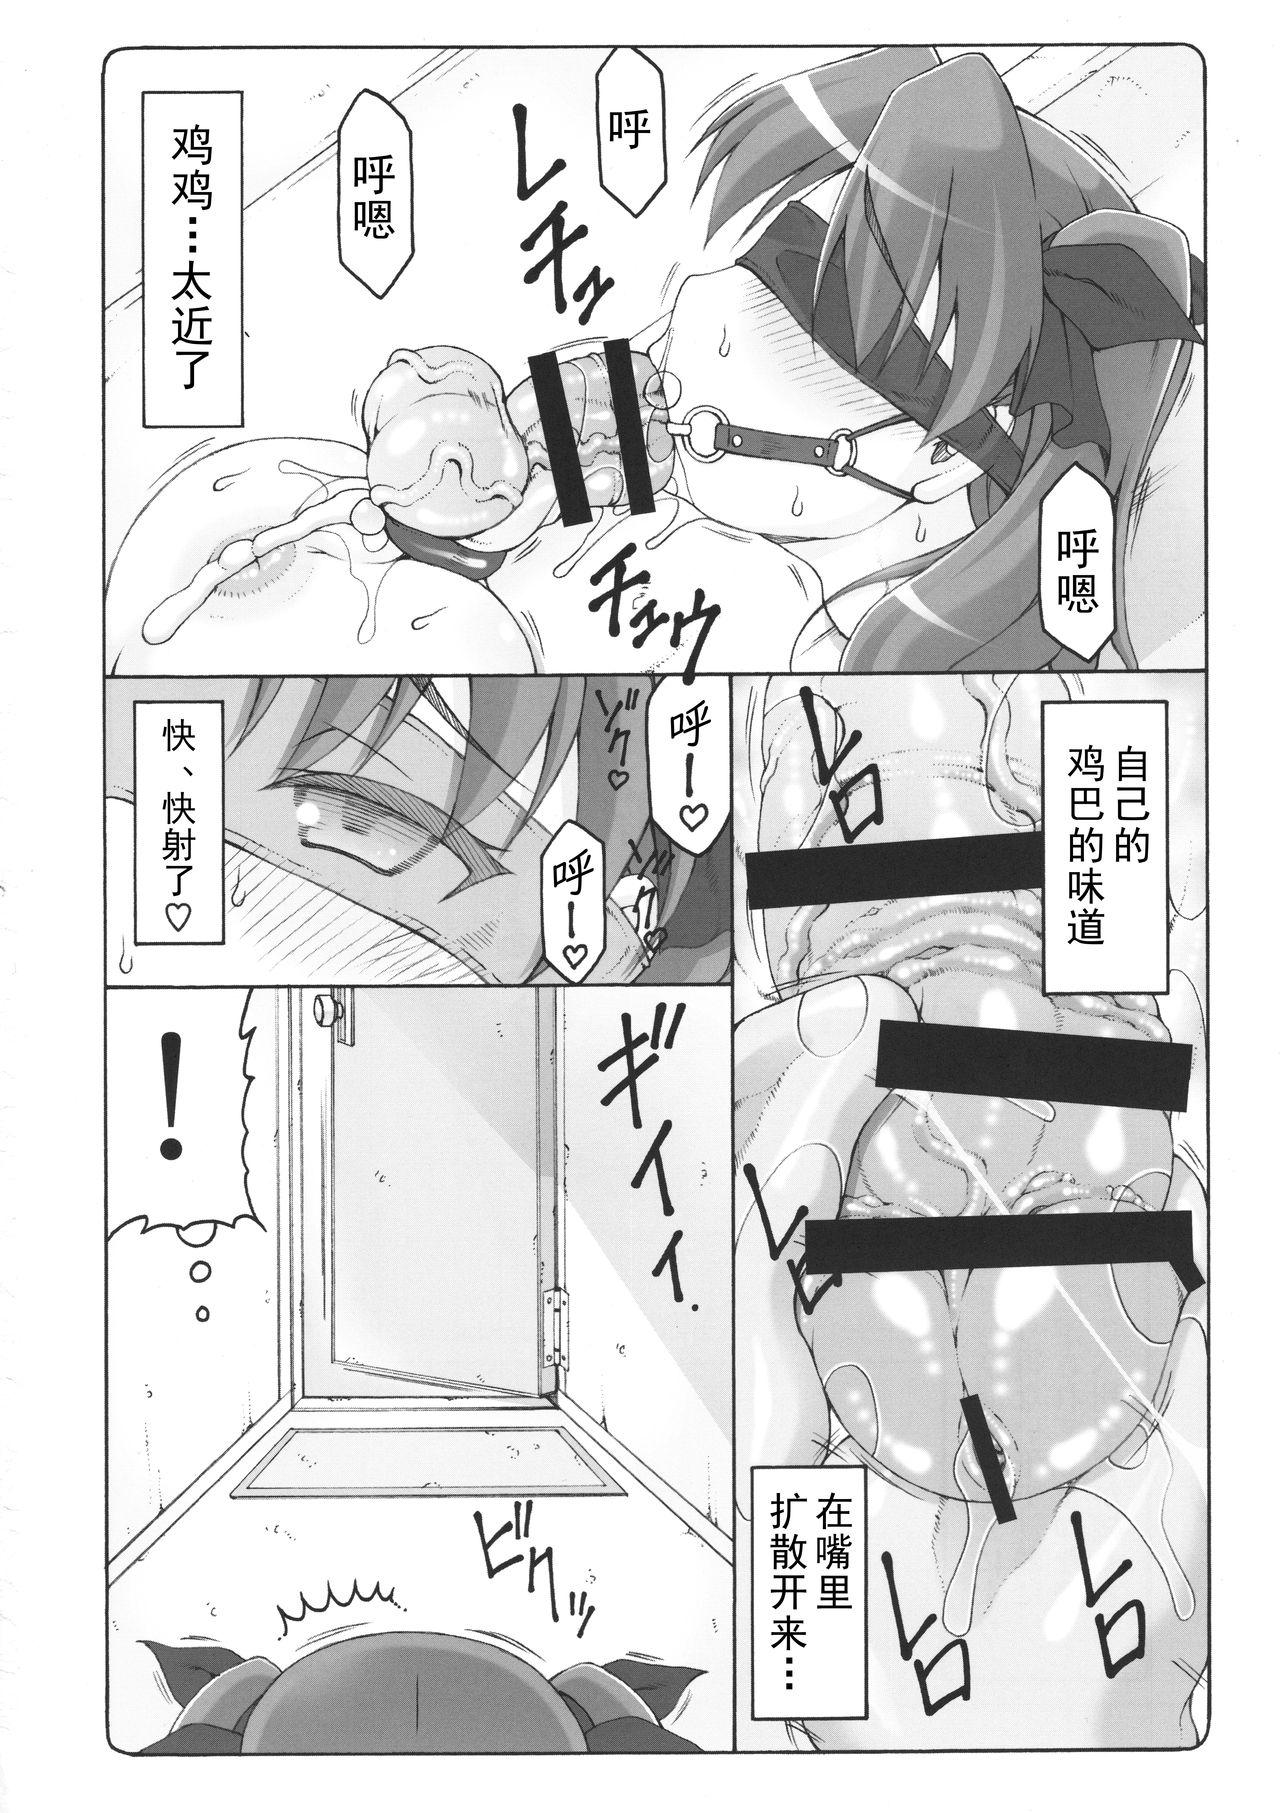 And Kotori 16 - Fate stay night Striptease - Page 6